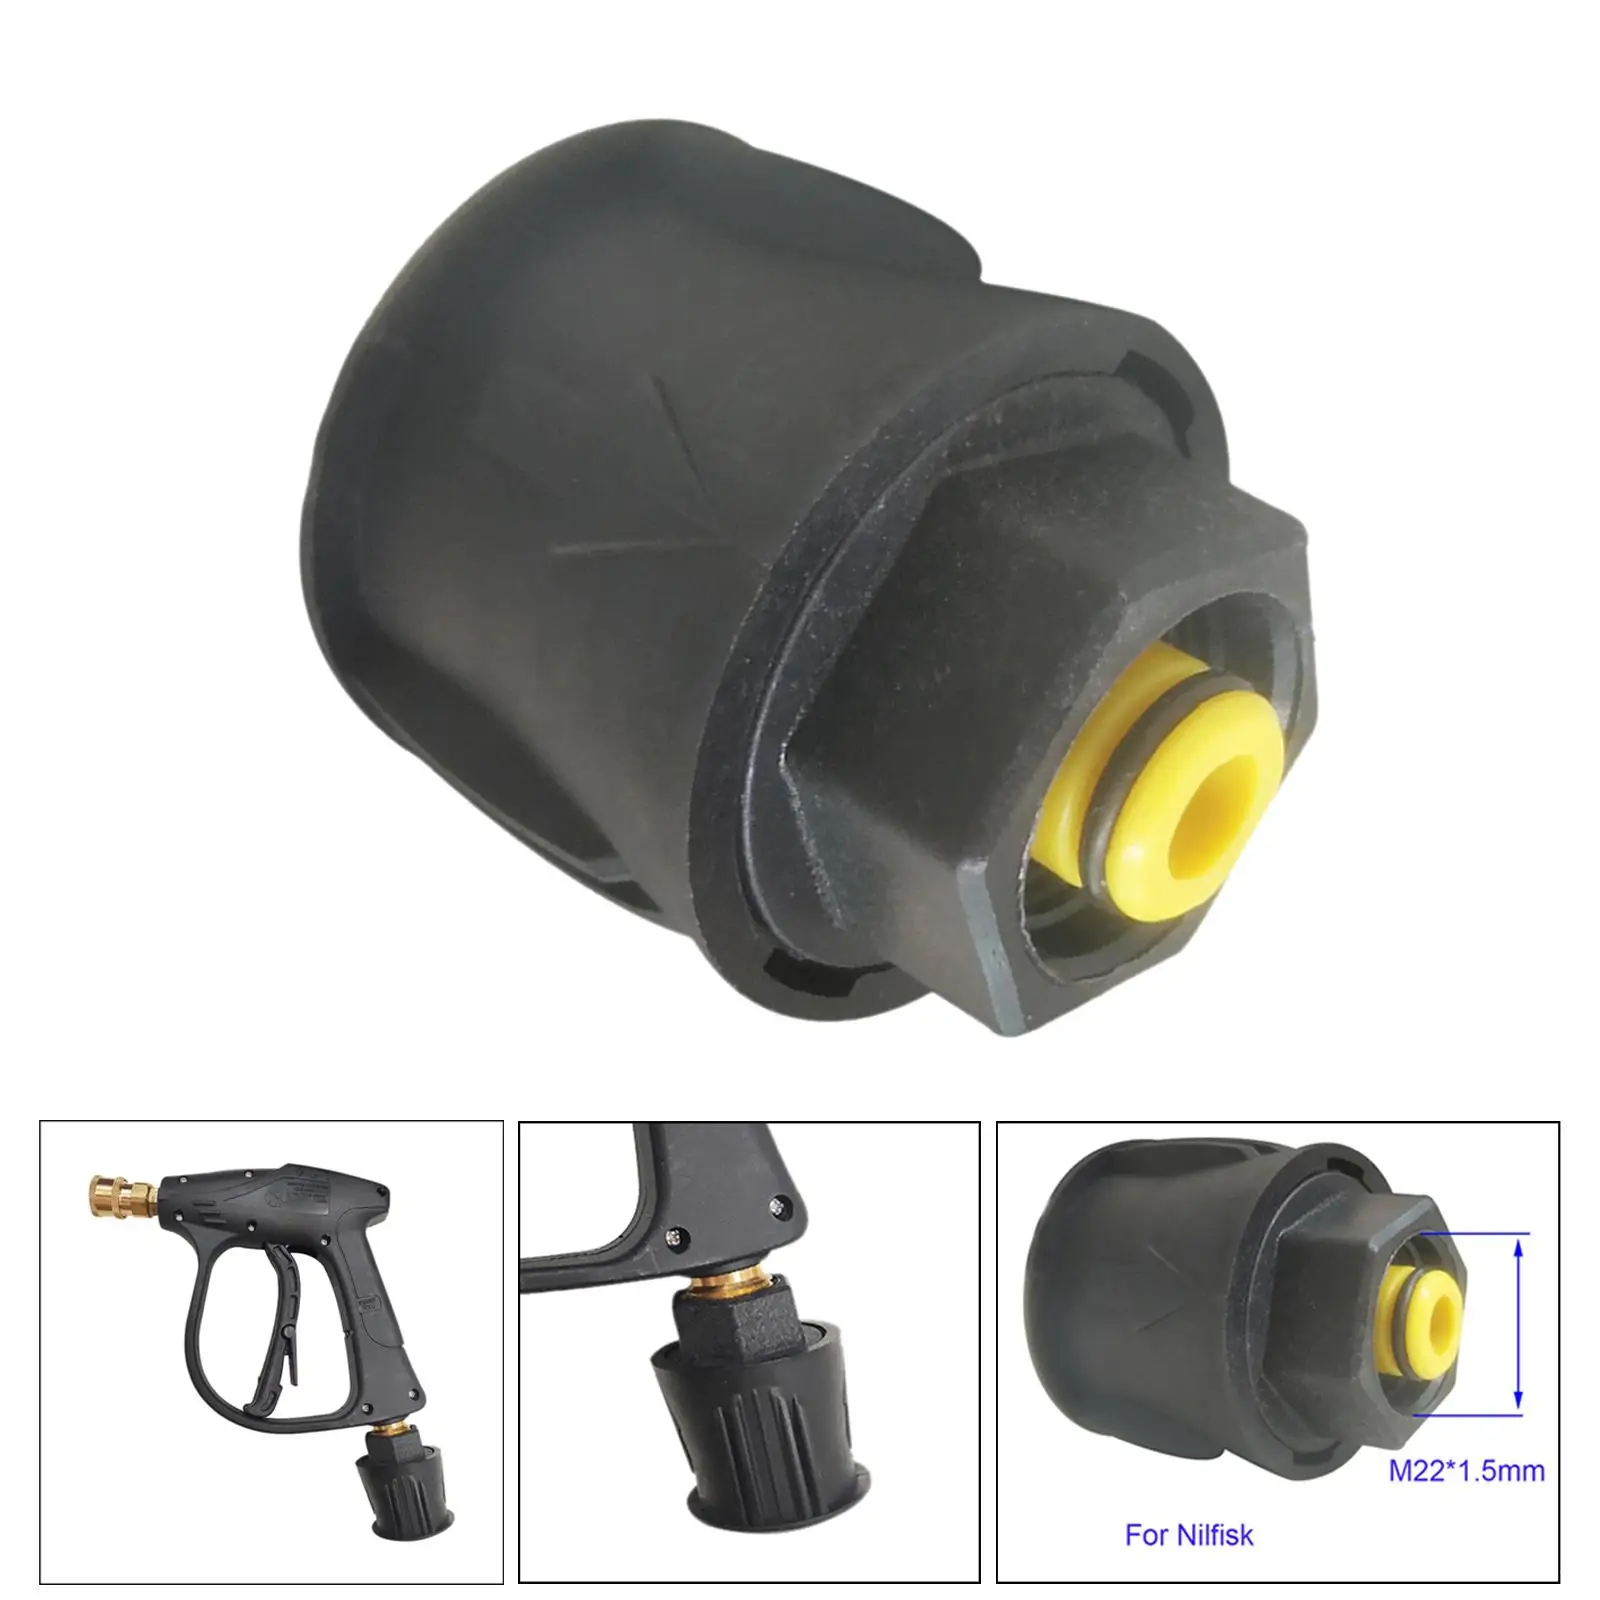 High Pressure Washer Hose Adapter M22 Connector Converter Power Washer Outlet Fitting for Nilfisk Pressure Washer Hose Accs